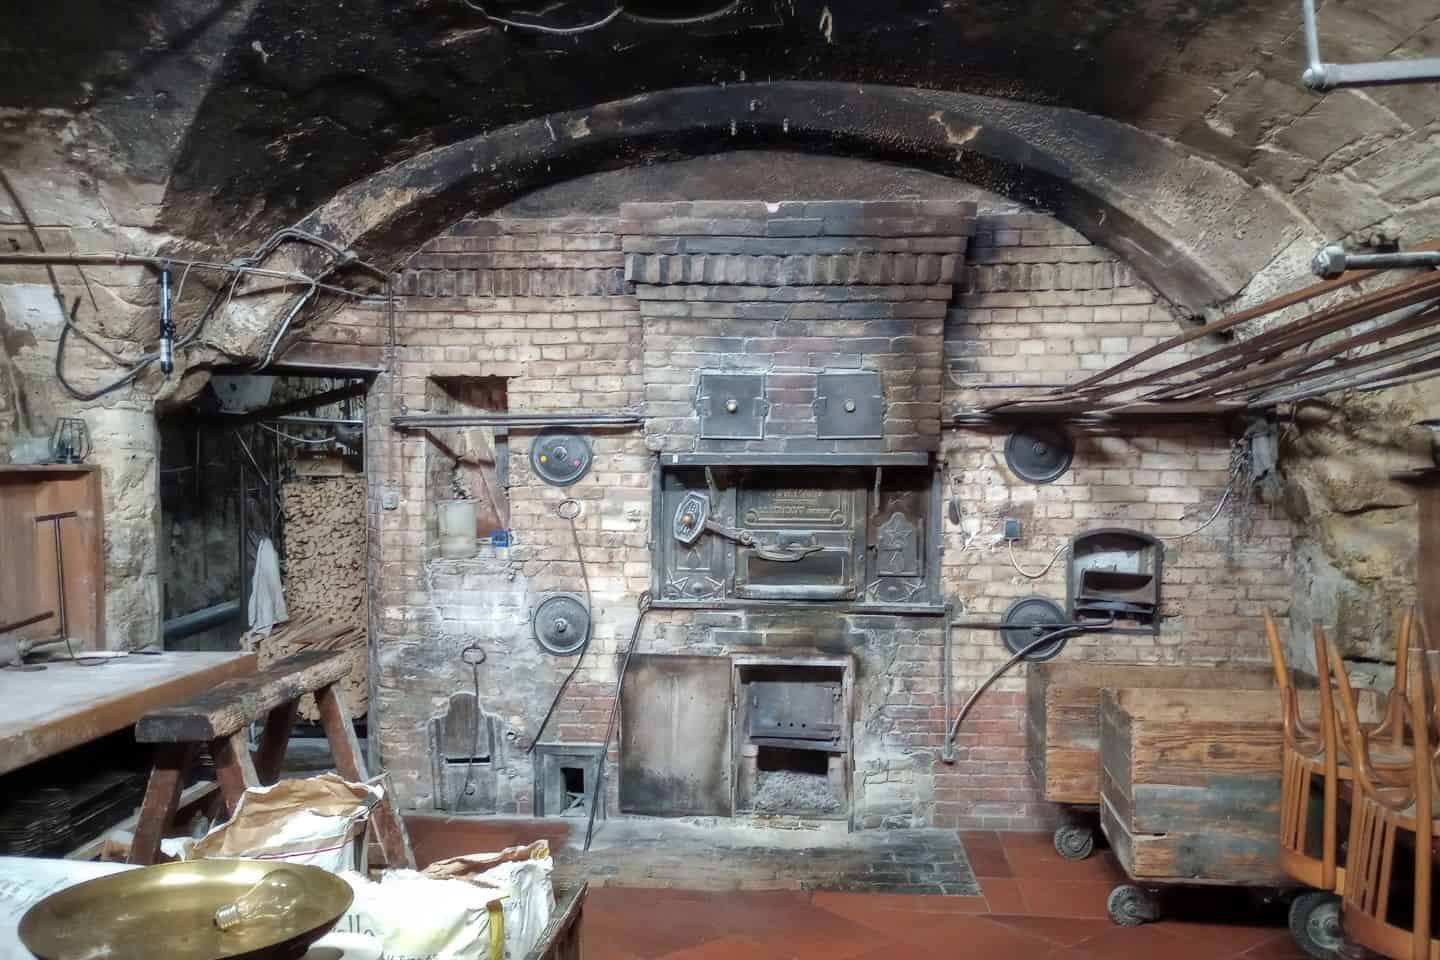 An old fashioned stone oven